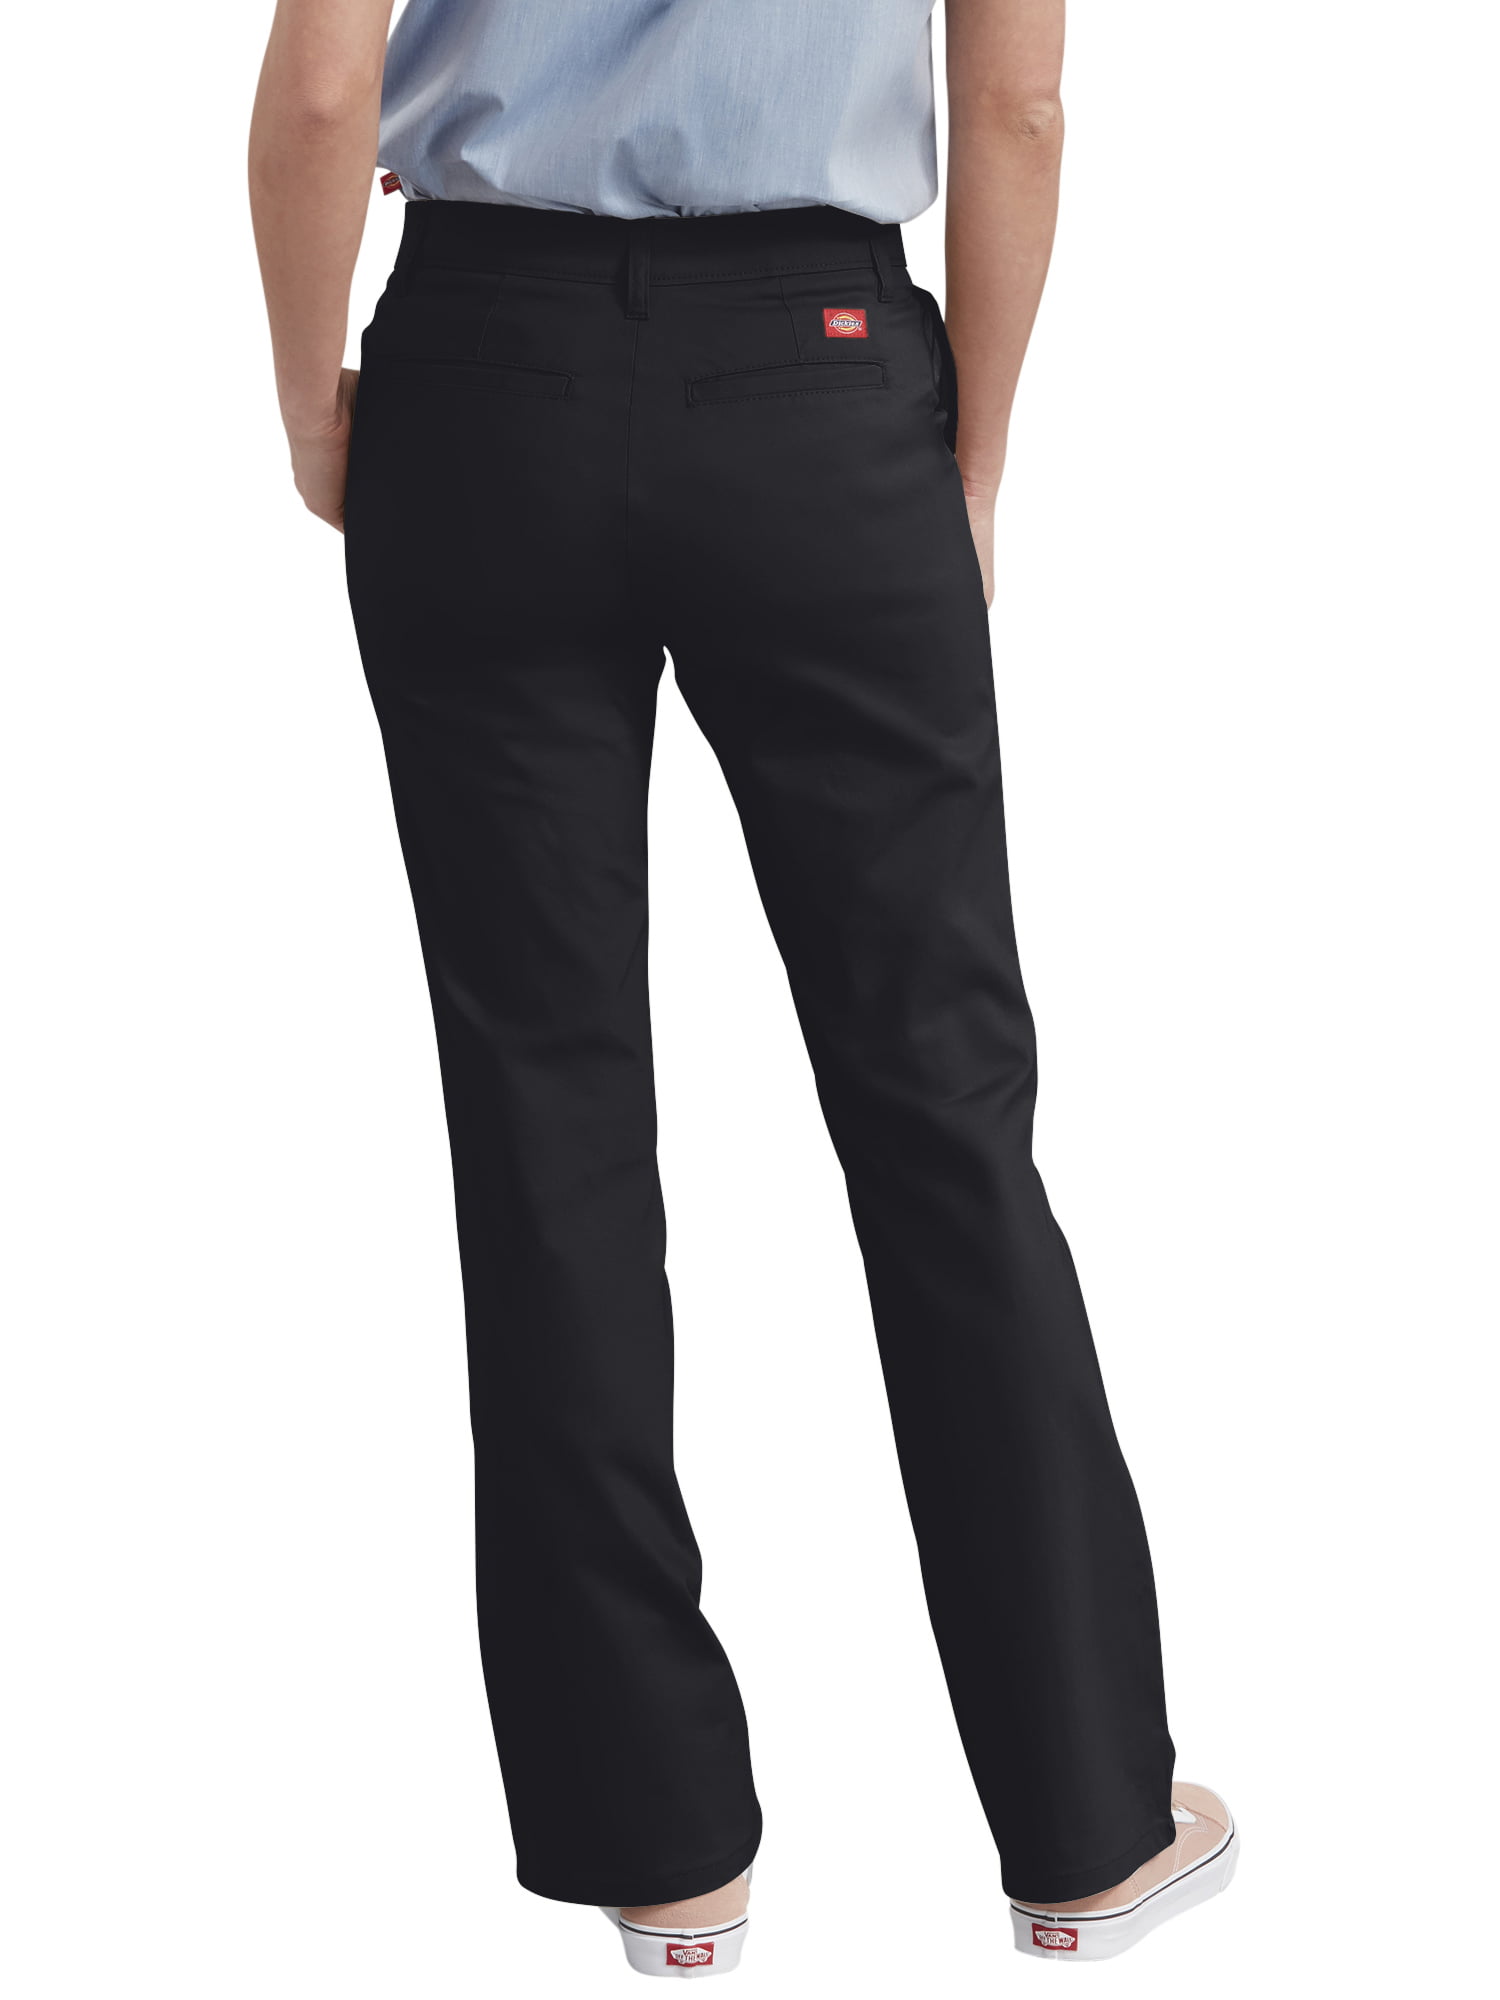 Dickies Men's Flat Front Stretch Twill Pant Slim Fit Bootcut Jeans